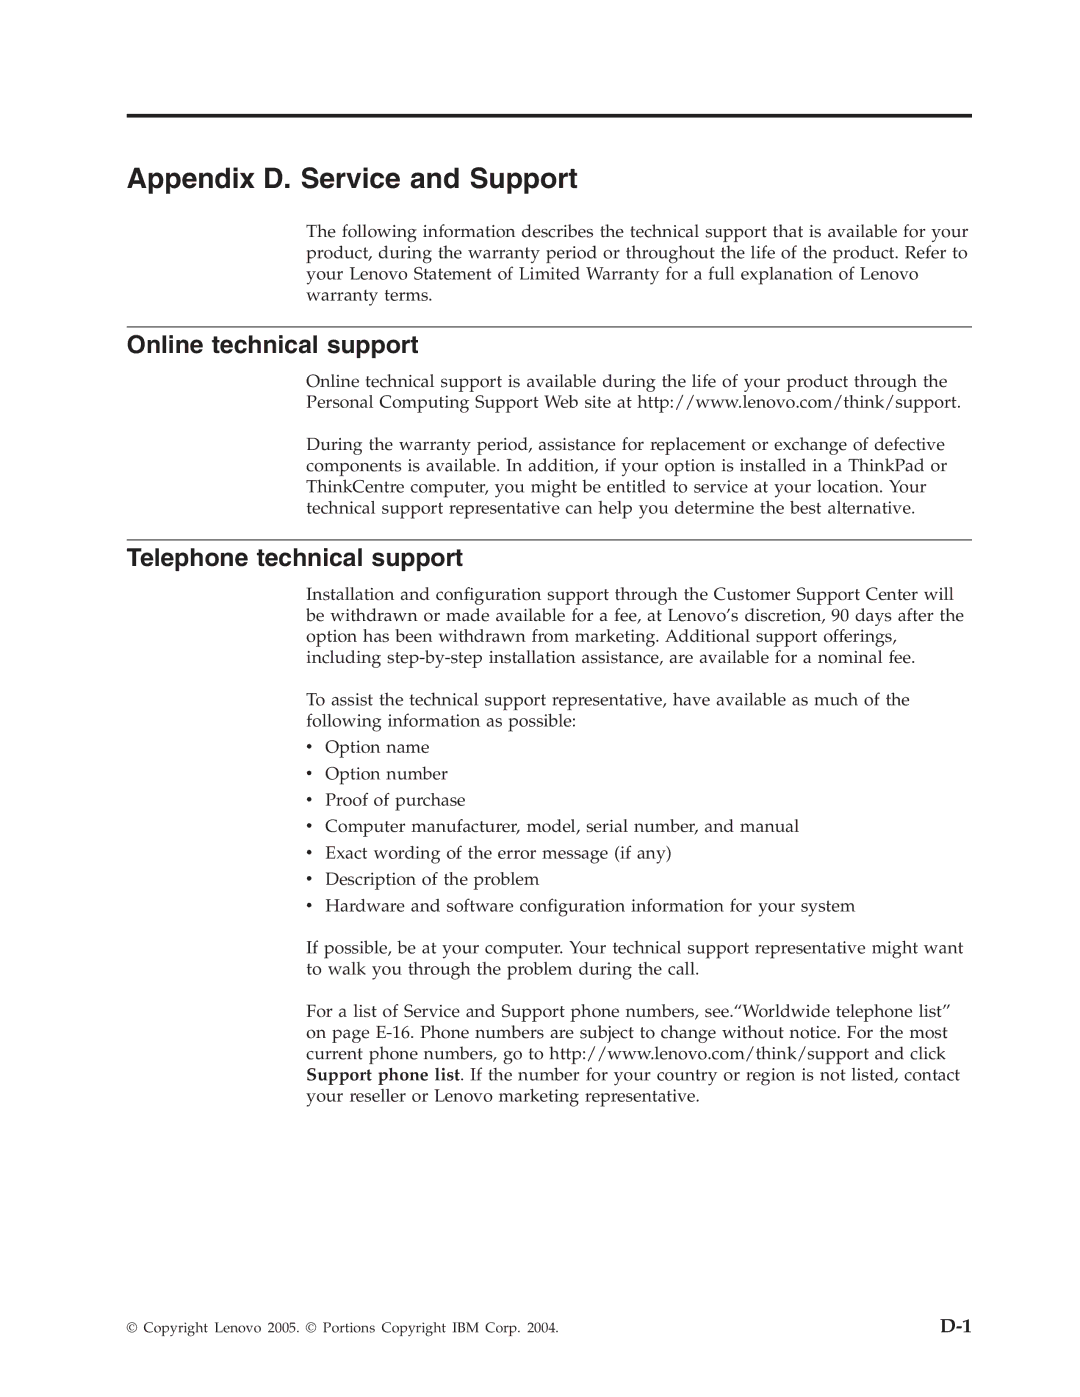 Lenovo E500 manual Appendix D. Service and Support, Online technical support, Telephone technical support 